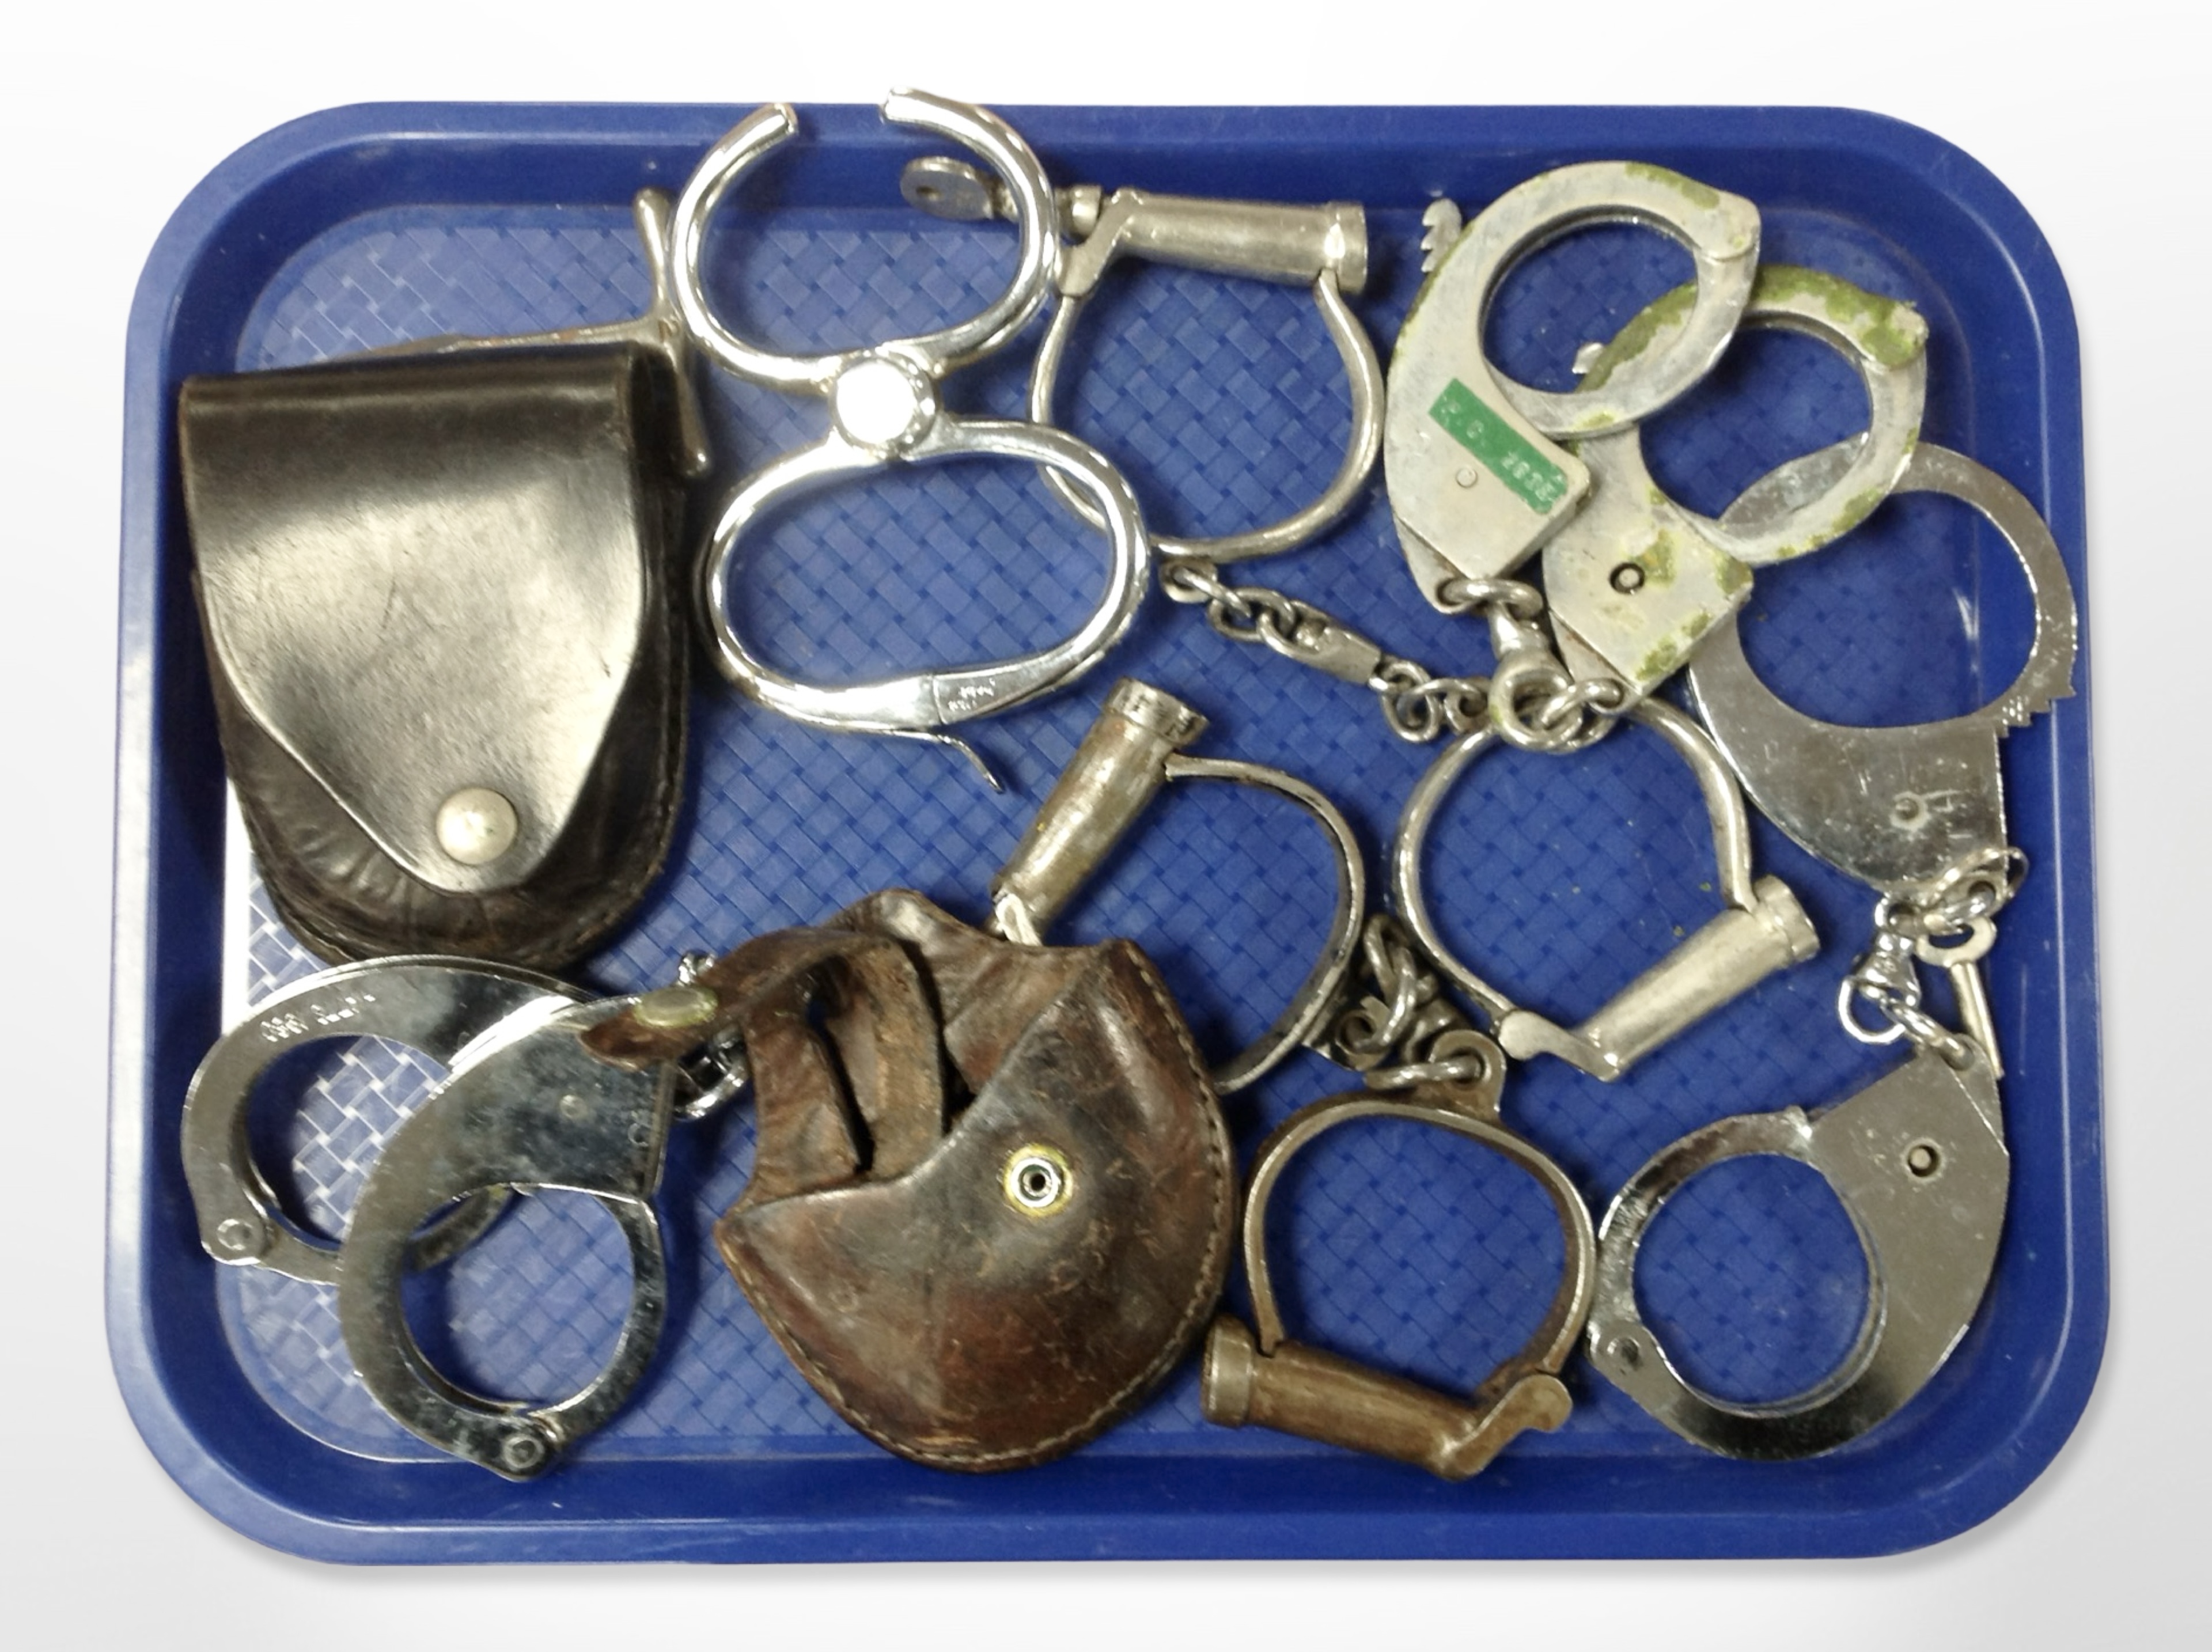 A group of antique and later handcuffs.